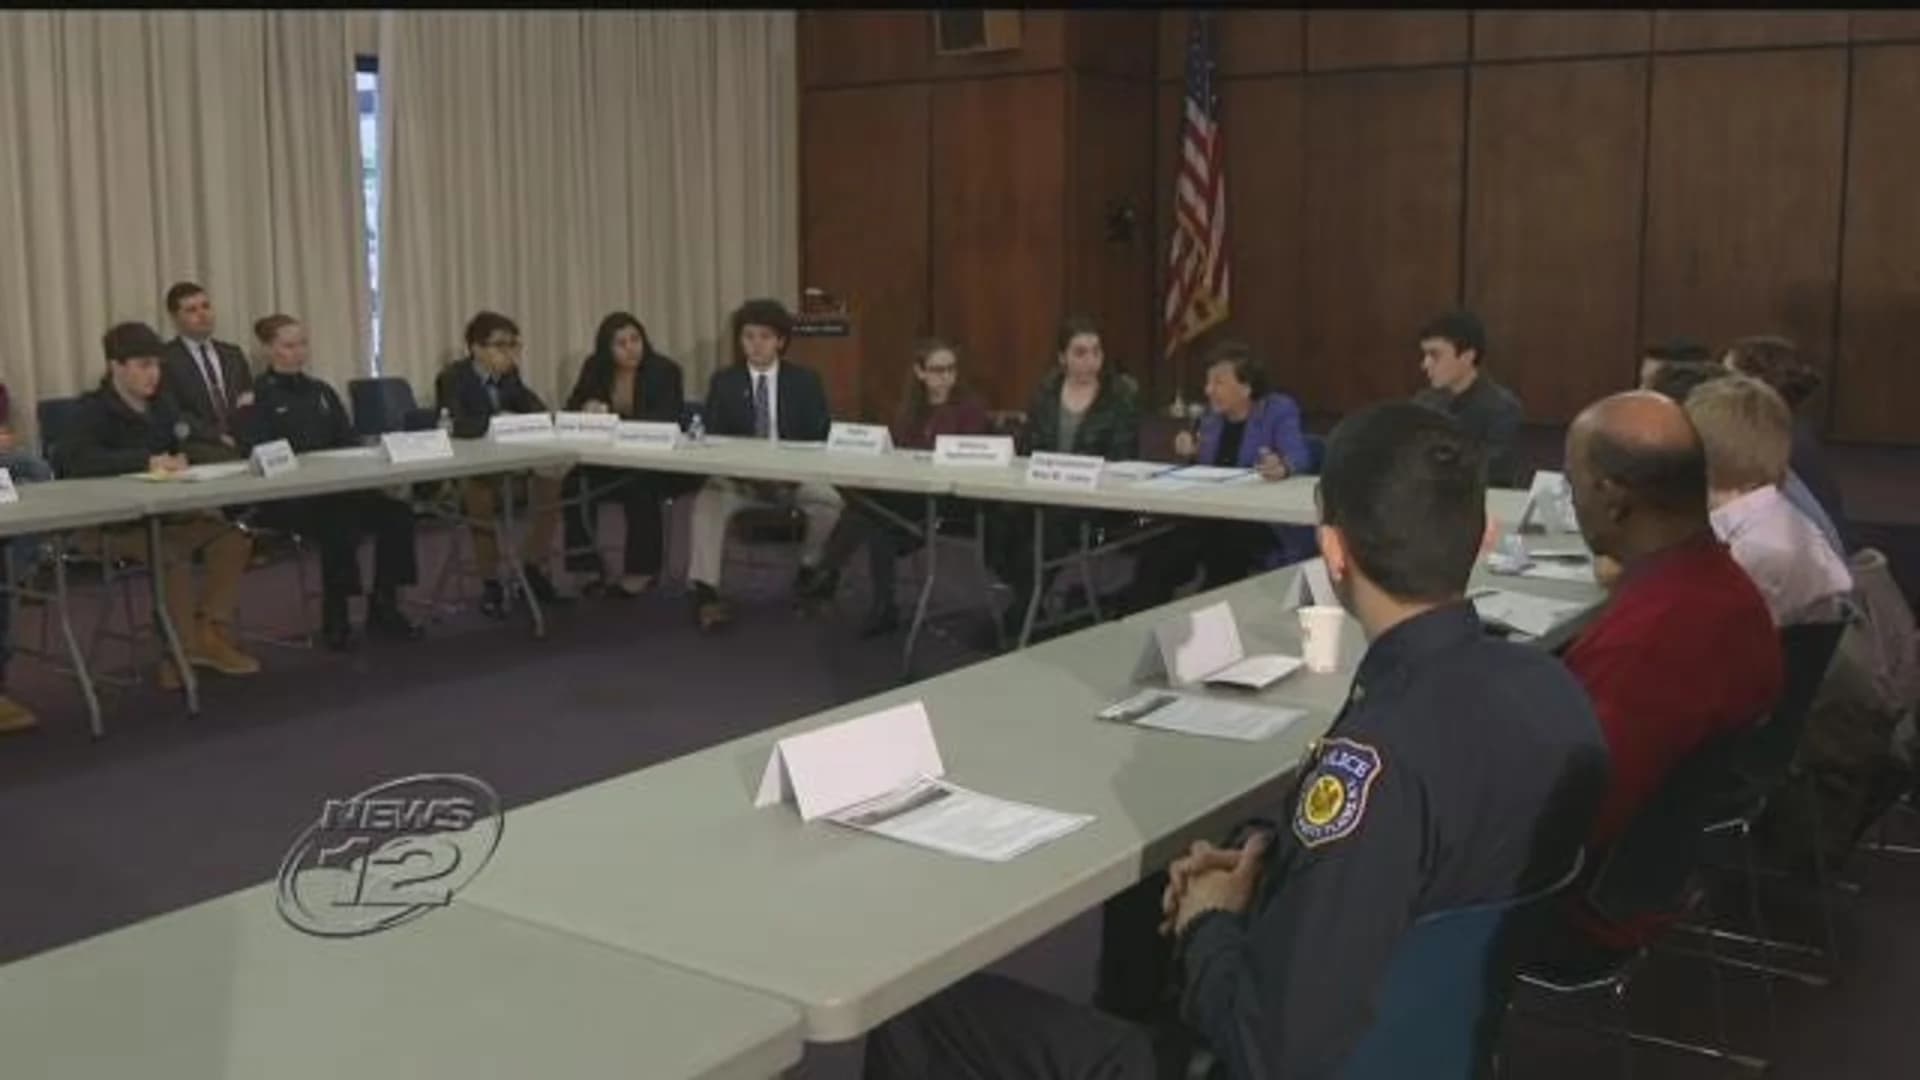 Rep. Lowey meets with students, law enforcement on gun violence